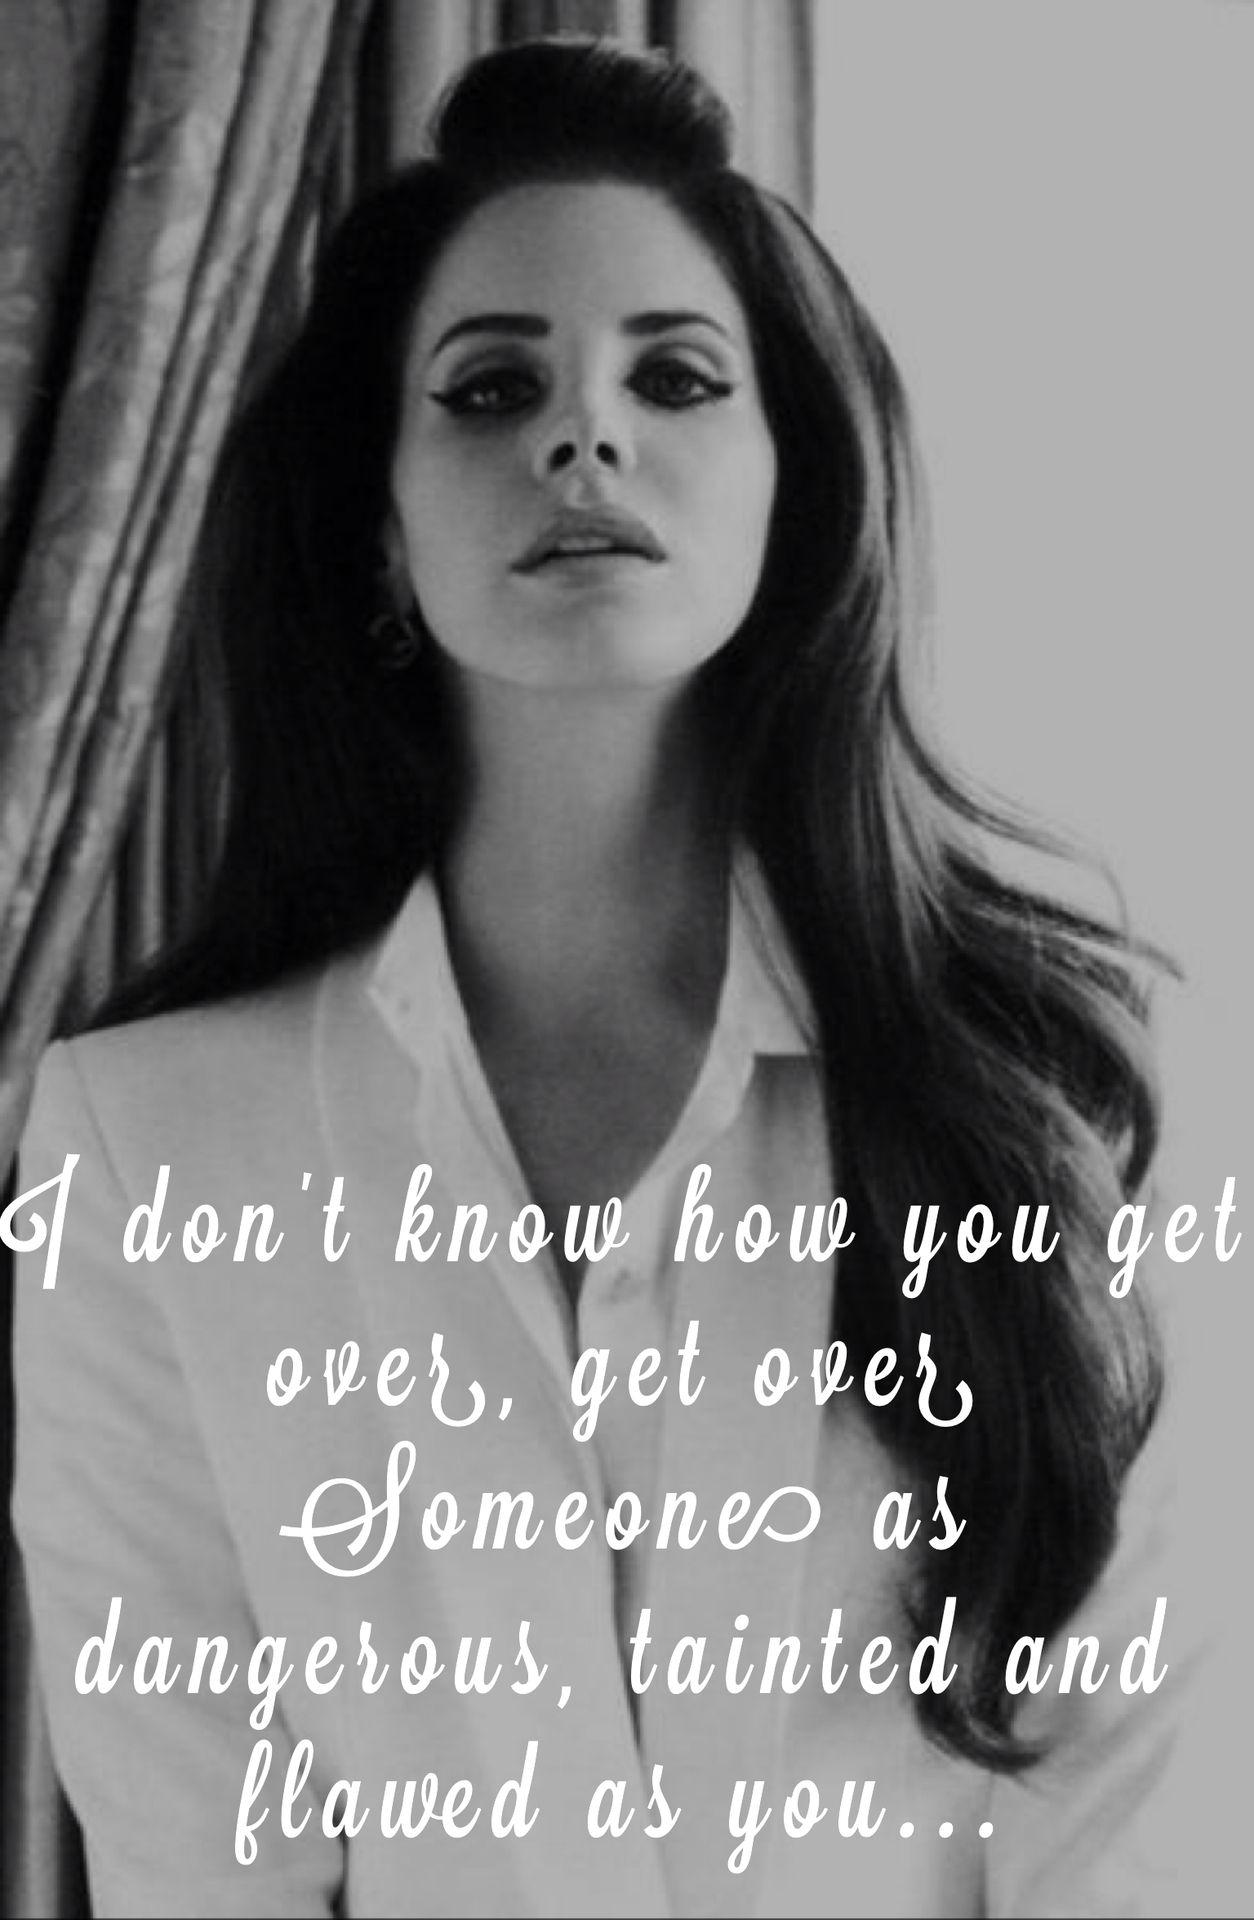 Lana Del Rey Dollar Man _ I don't know how you get over